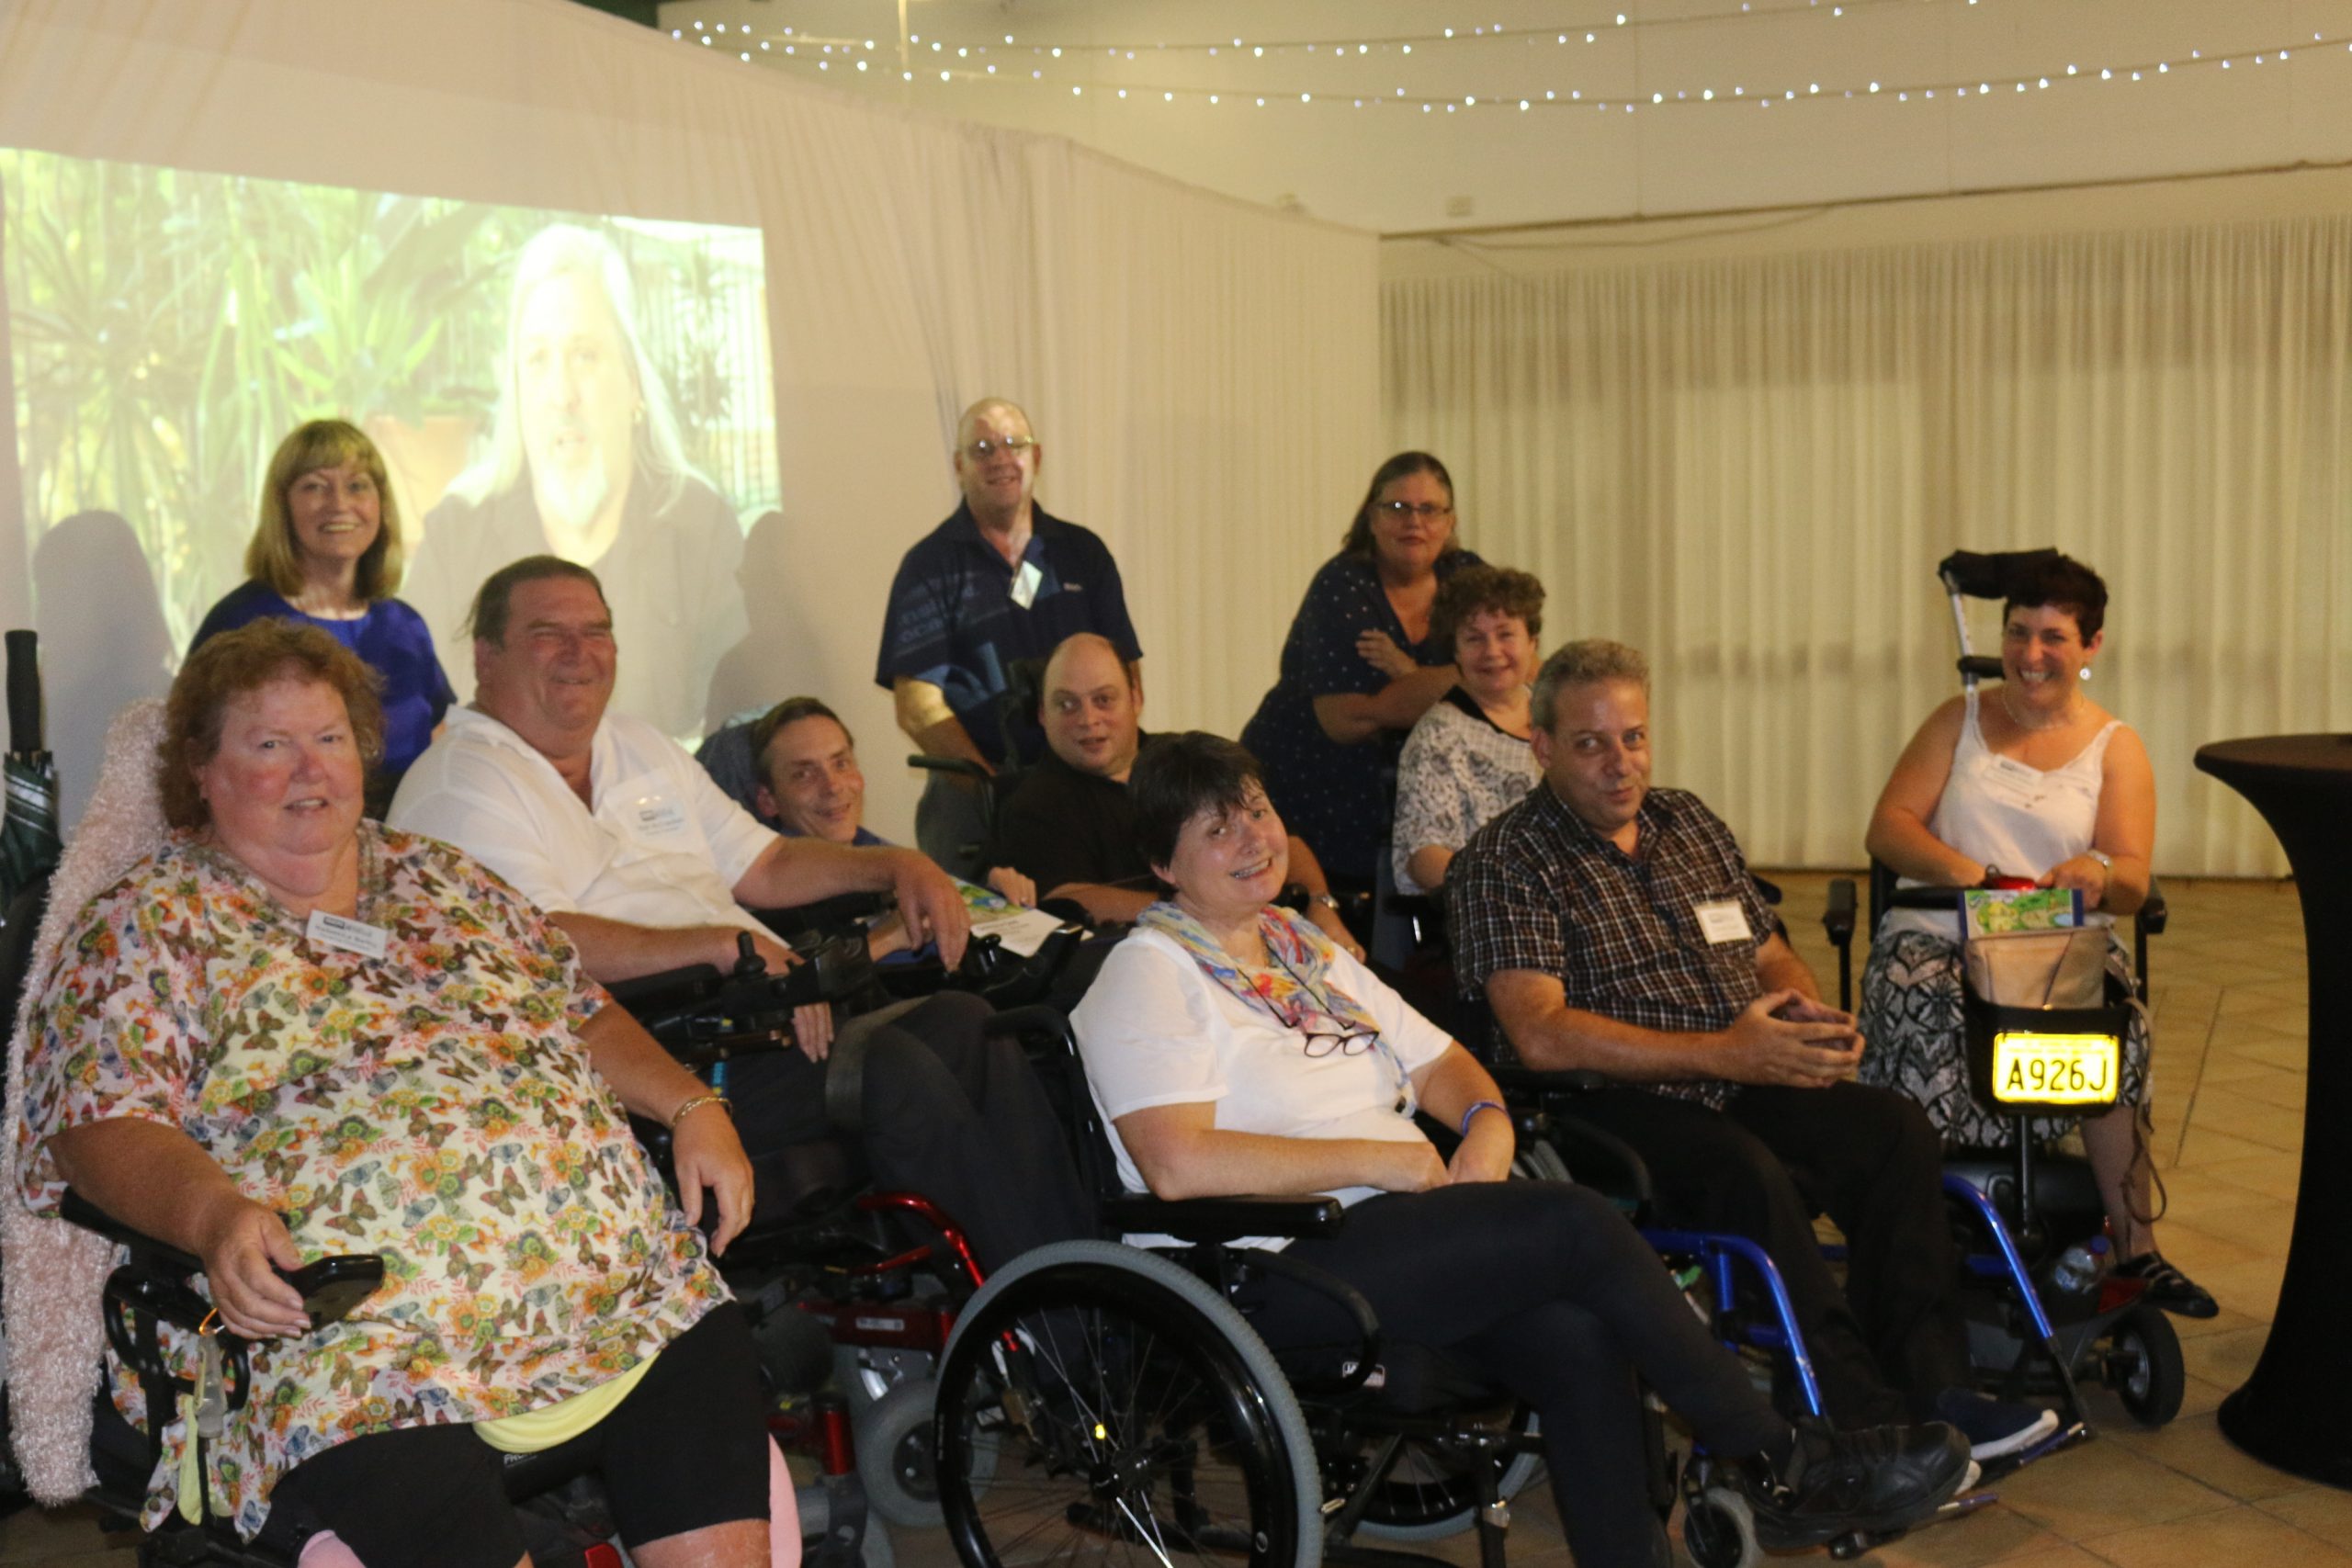 A group of men and women, some standing and some in wheel chairs. All looking at the camera.